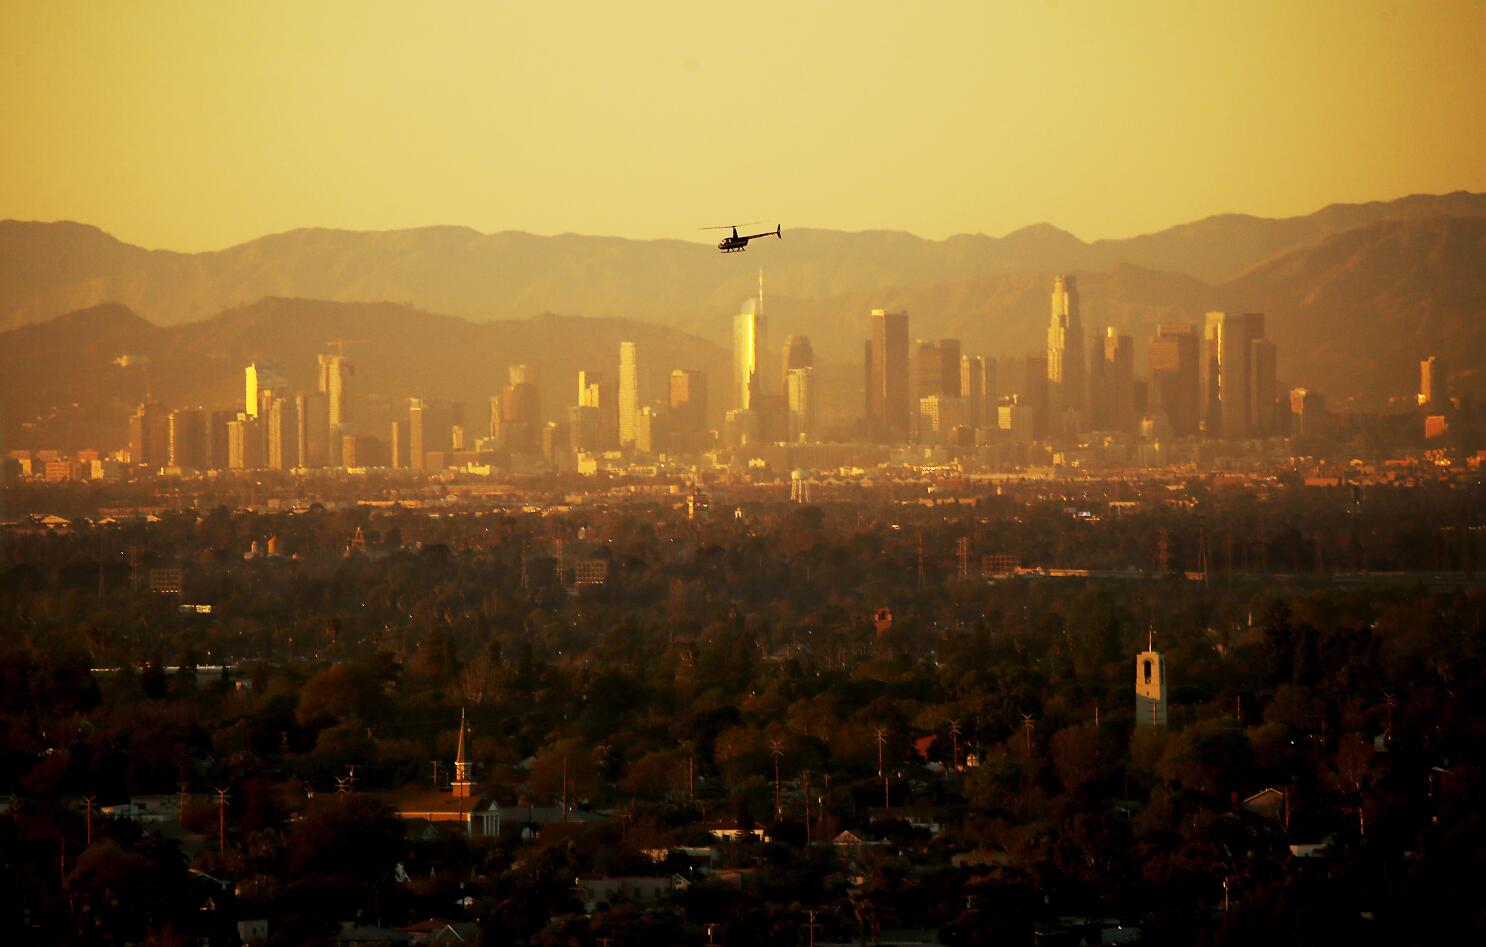 Los Angeles air the 'cleanest' it's been in a decade, but rising